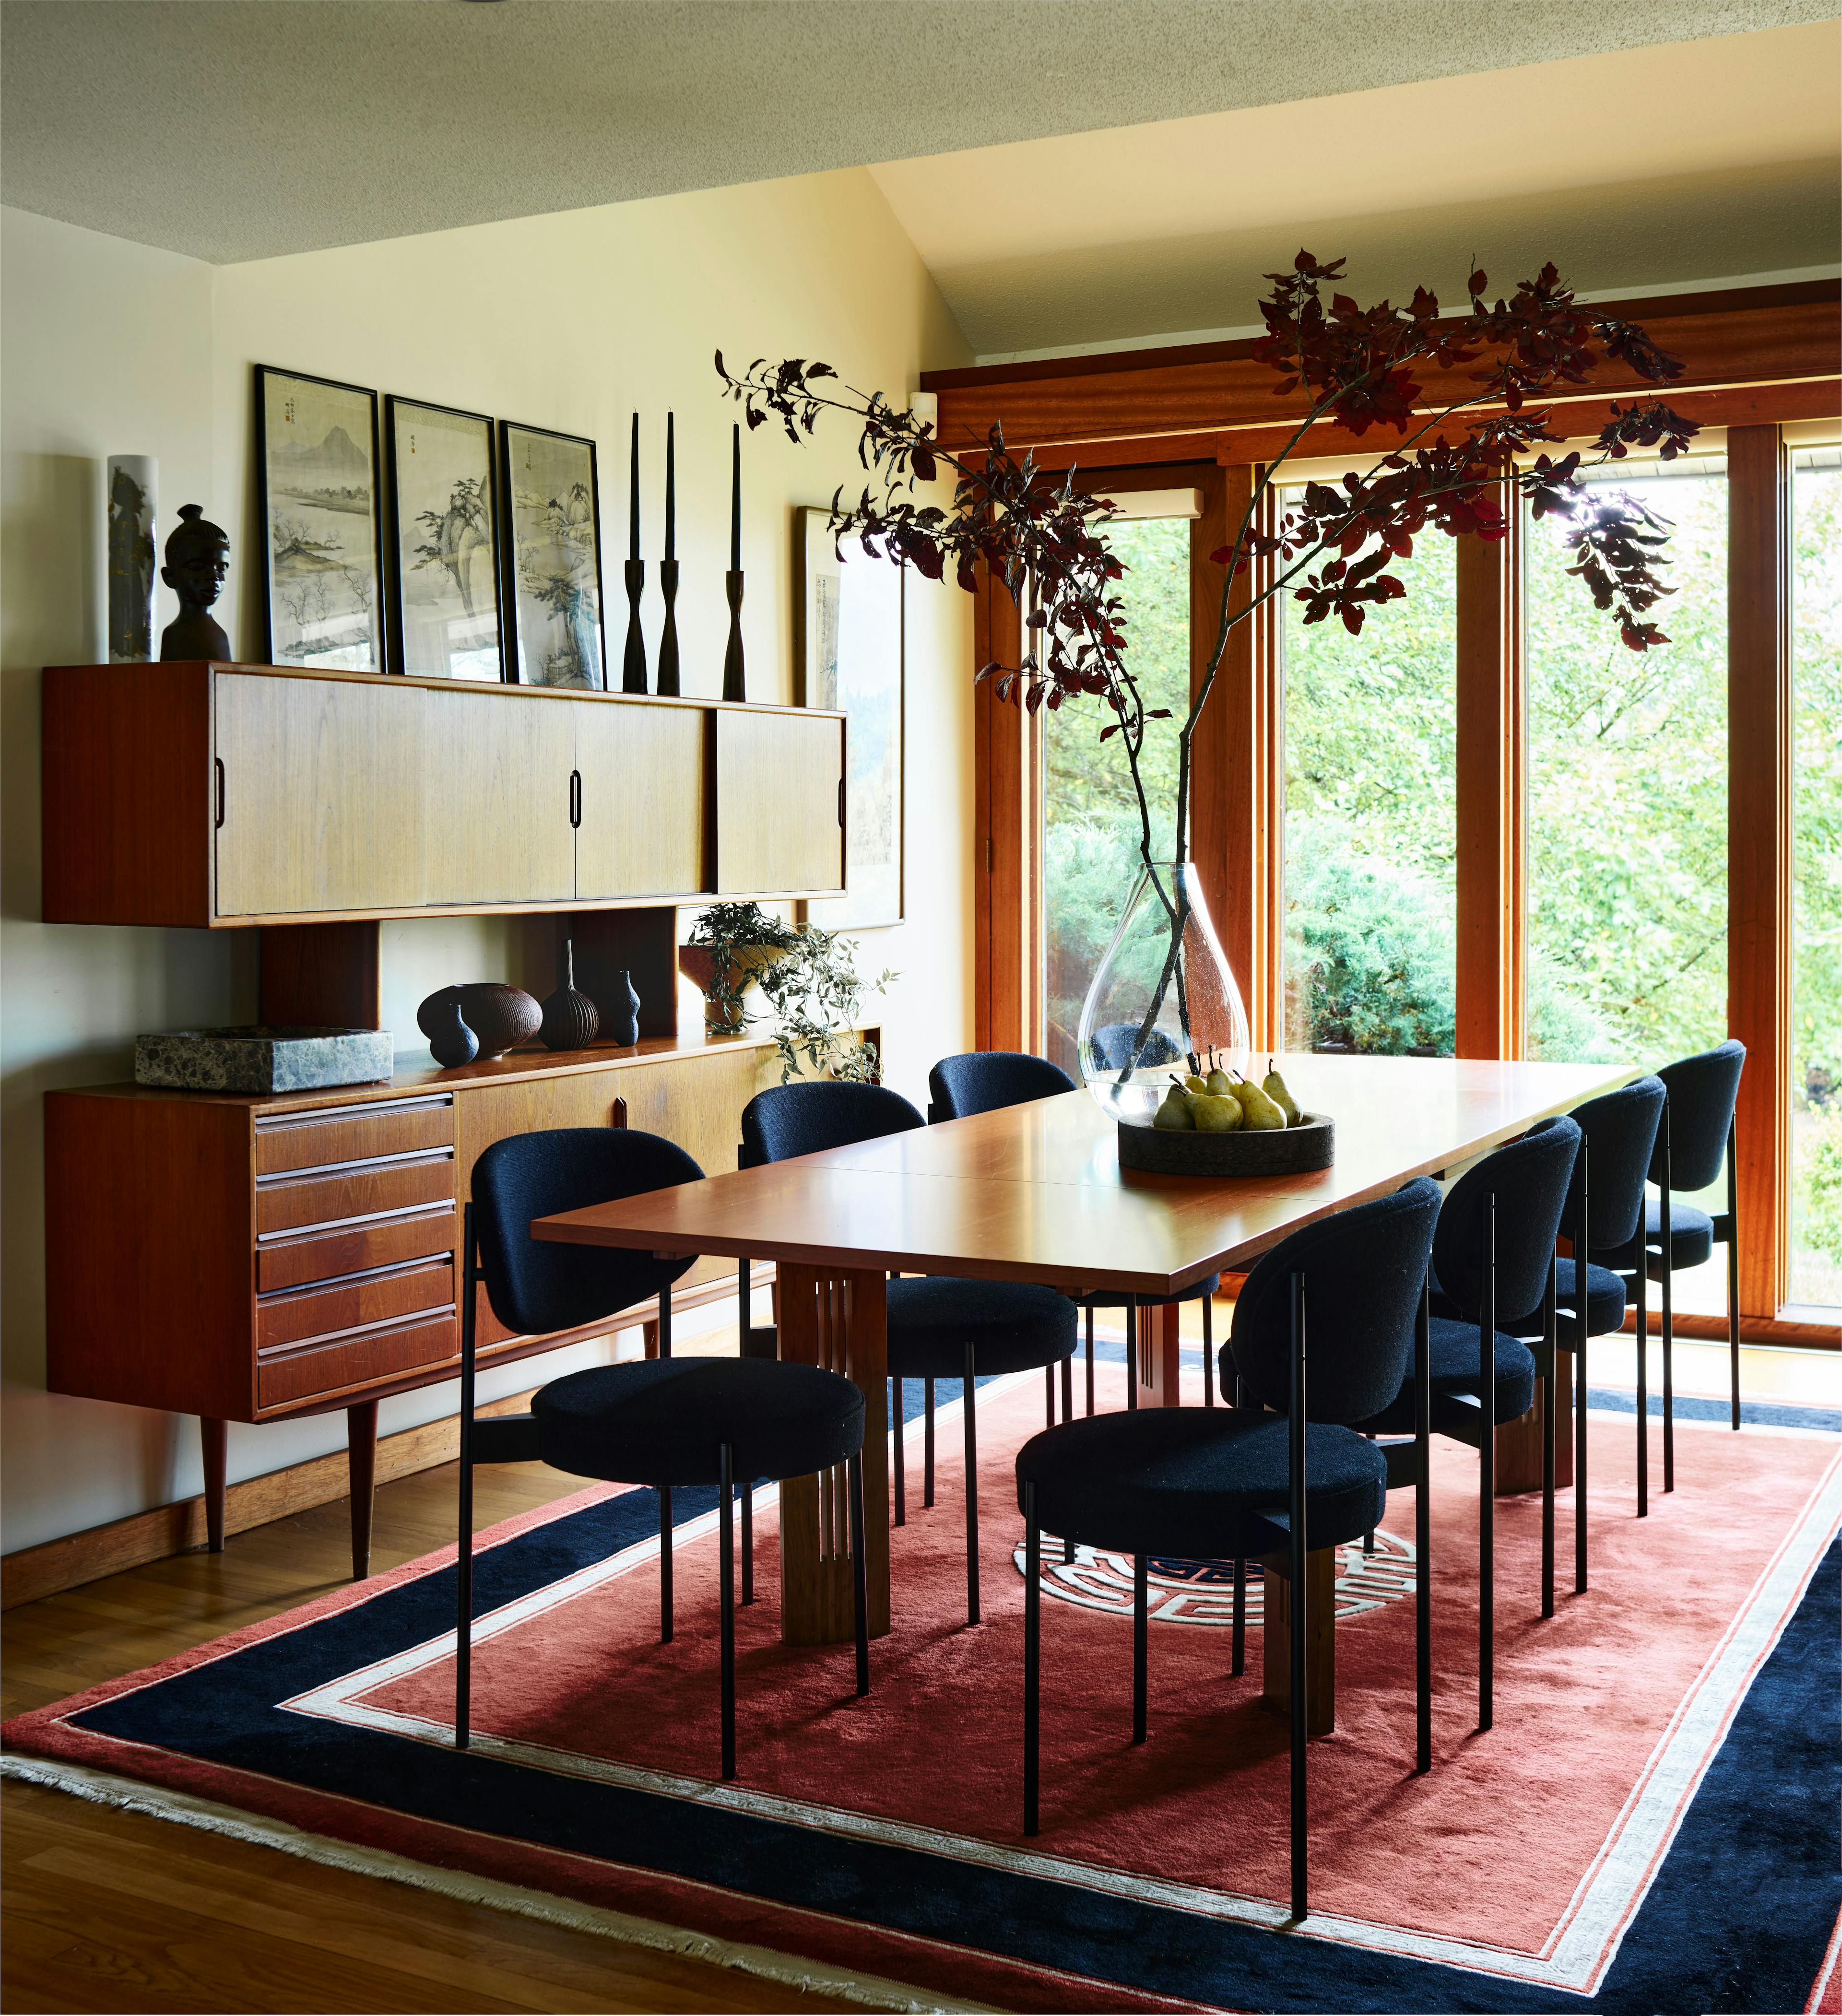 A dining room with a large table and chairs in the Amherst Residence, blending old antiques with contemporary pieces in a mountain landscape setting.